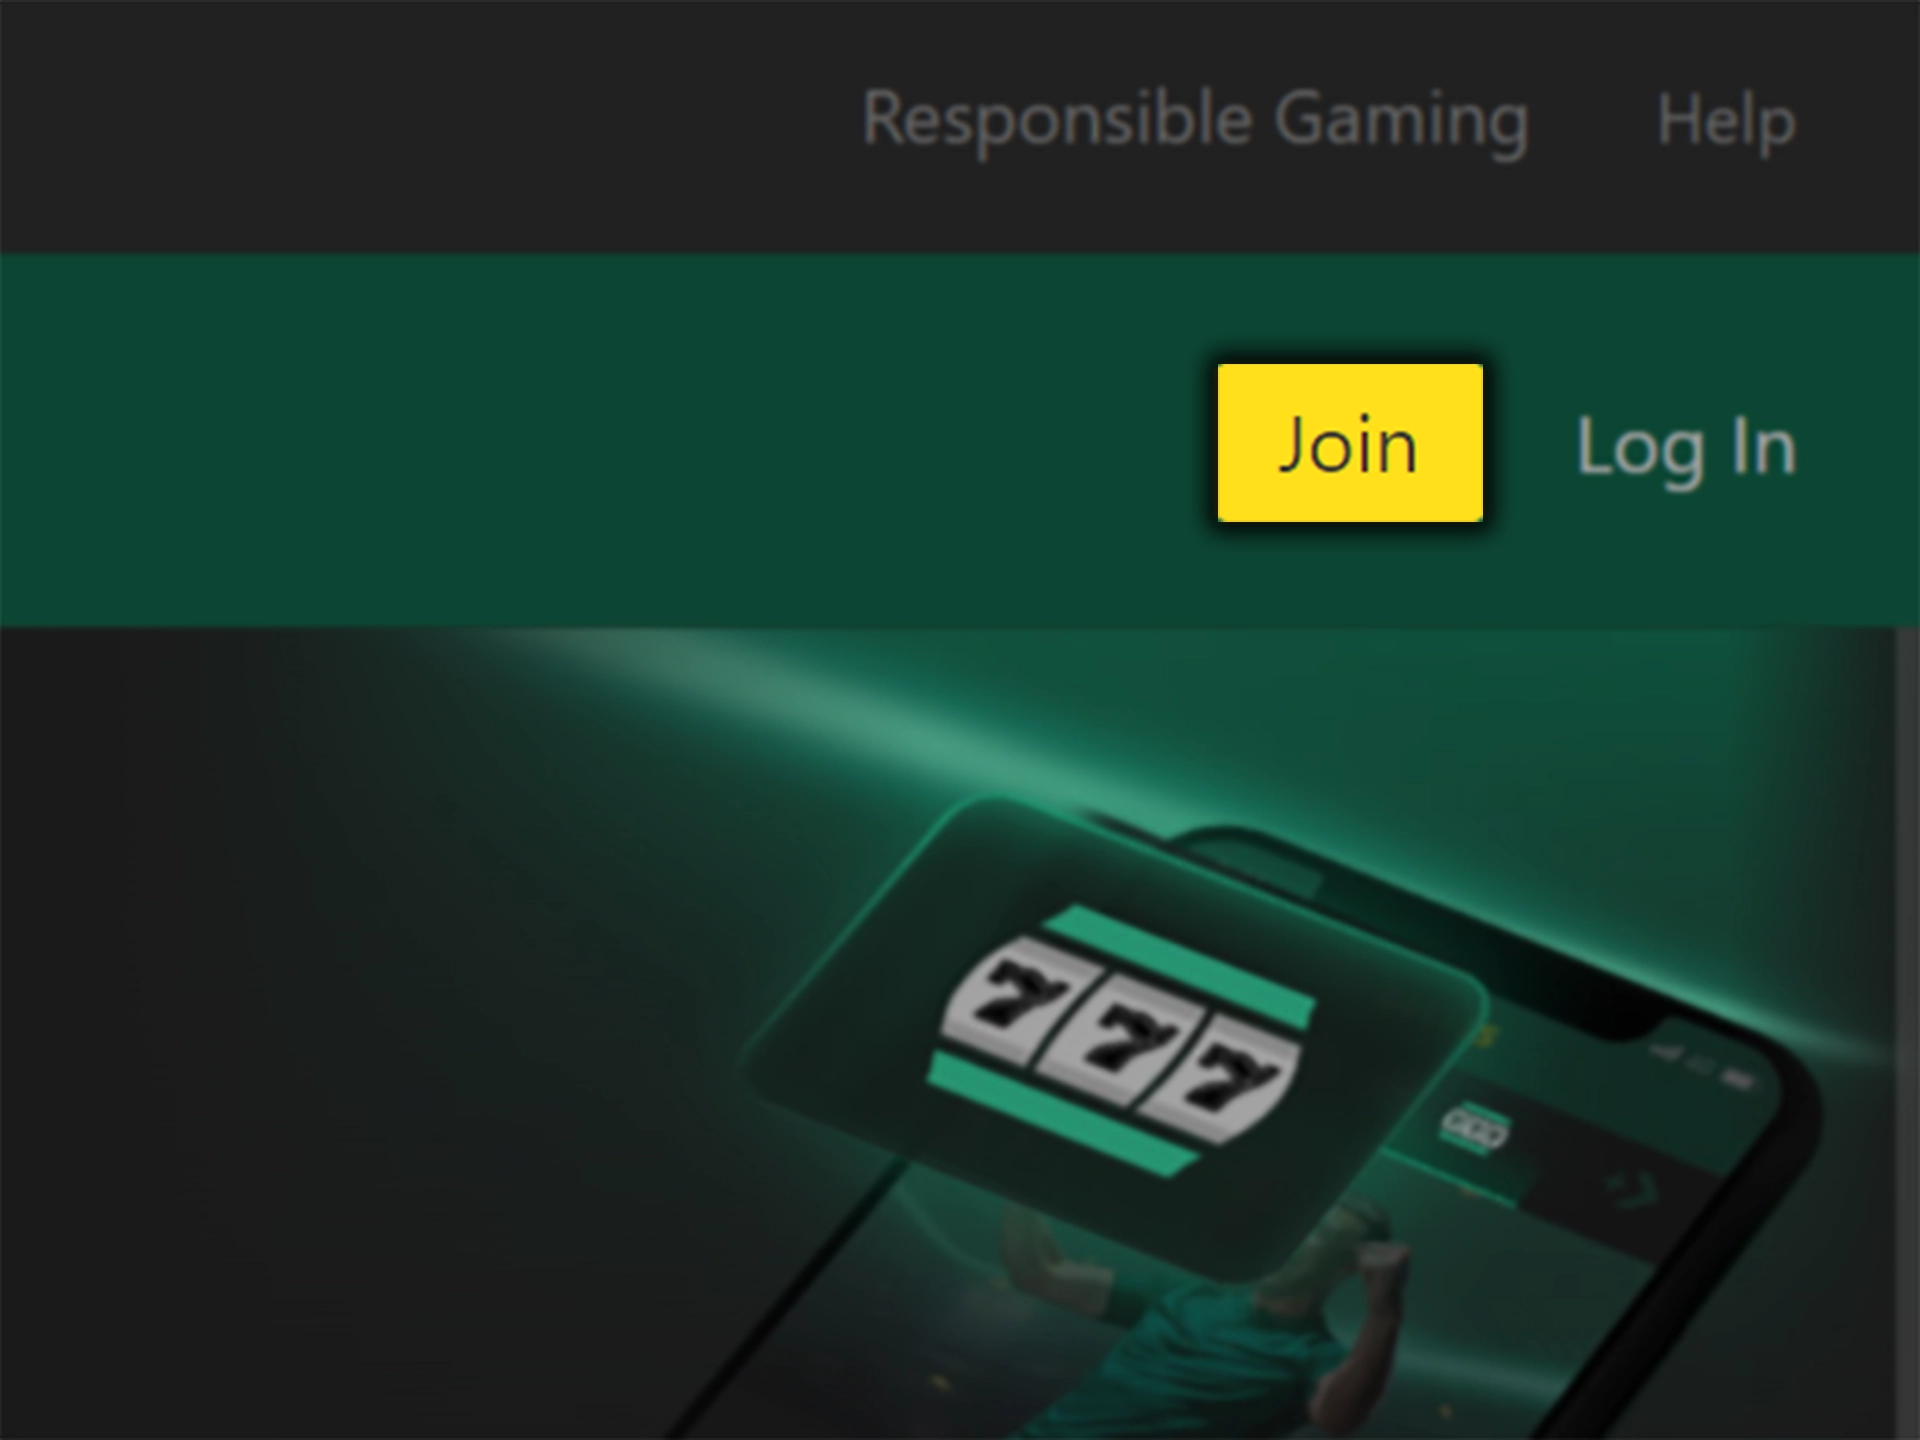 Click on the join button to open the Bet365 registration form.